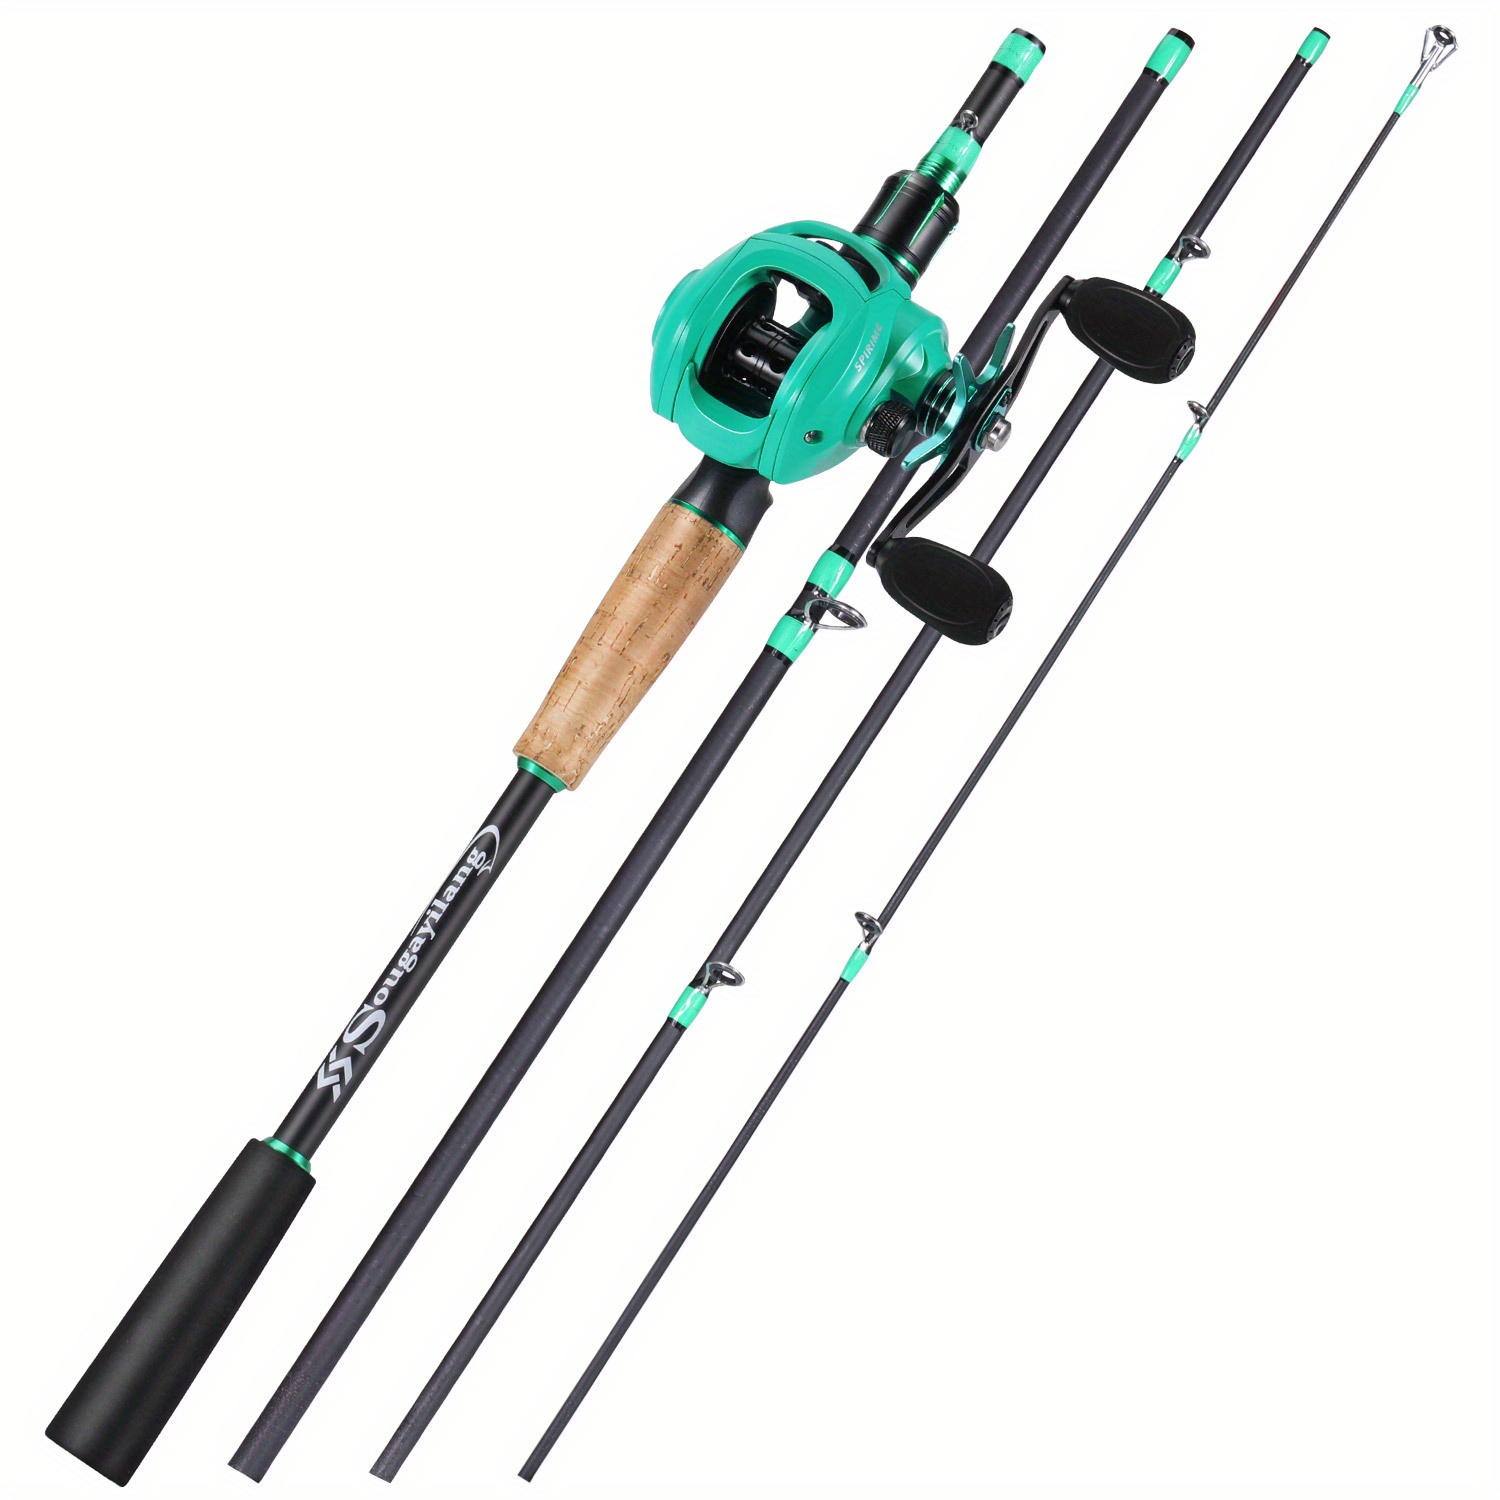  Fishing Rod Portable Fishing Rod Reel Combo Lure Fishing Rod  and High Speed Baitcasting Reel Set Fishing Tackle for Saltwater Freshwater  Fishing Pole Travel : Sports & Outdoors